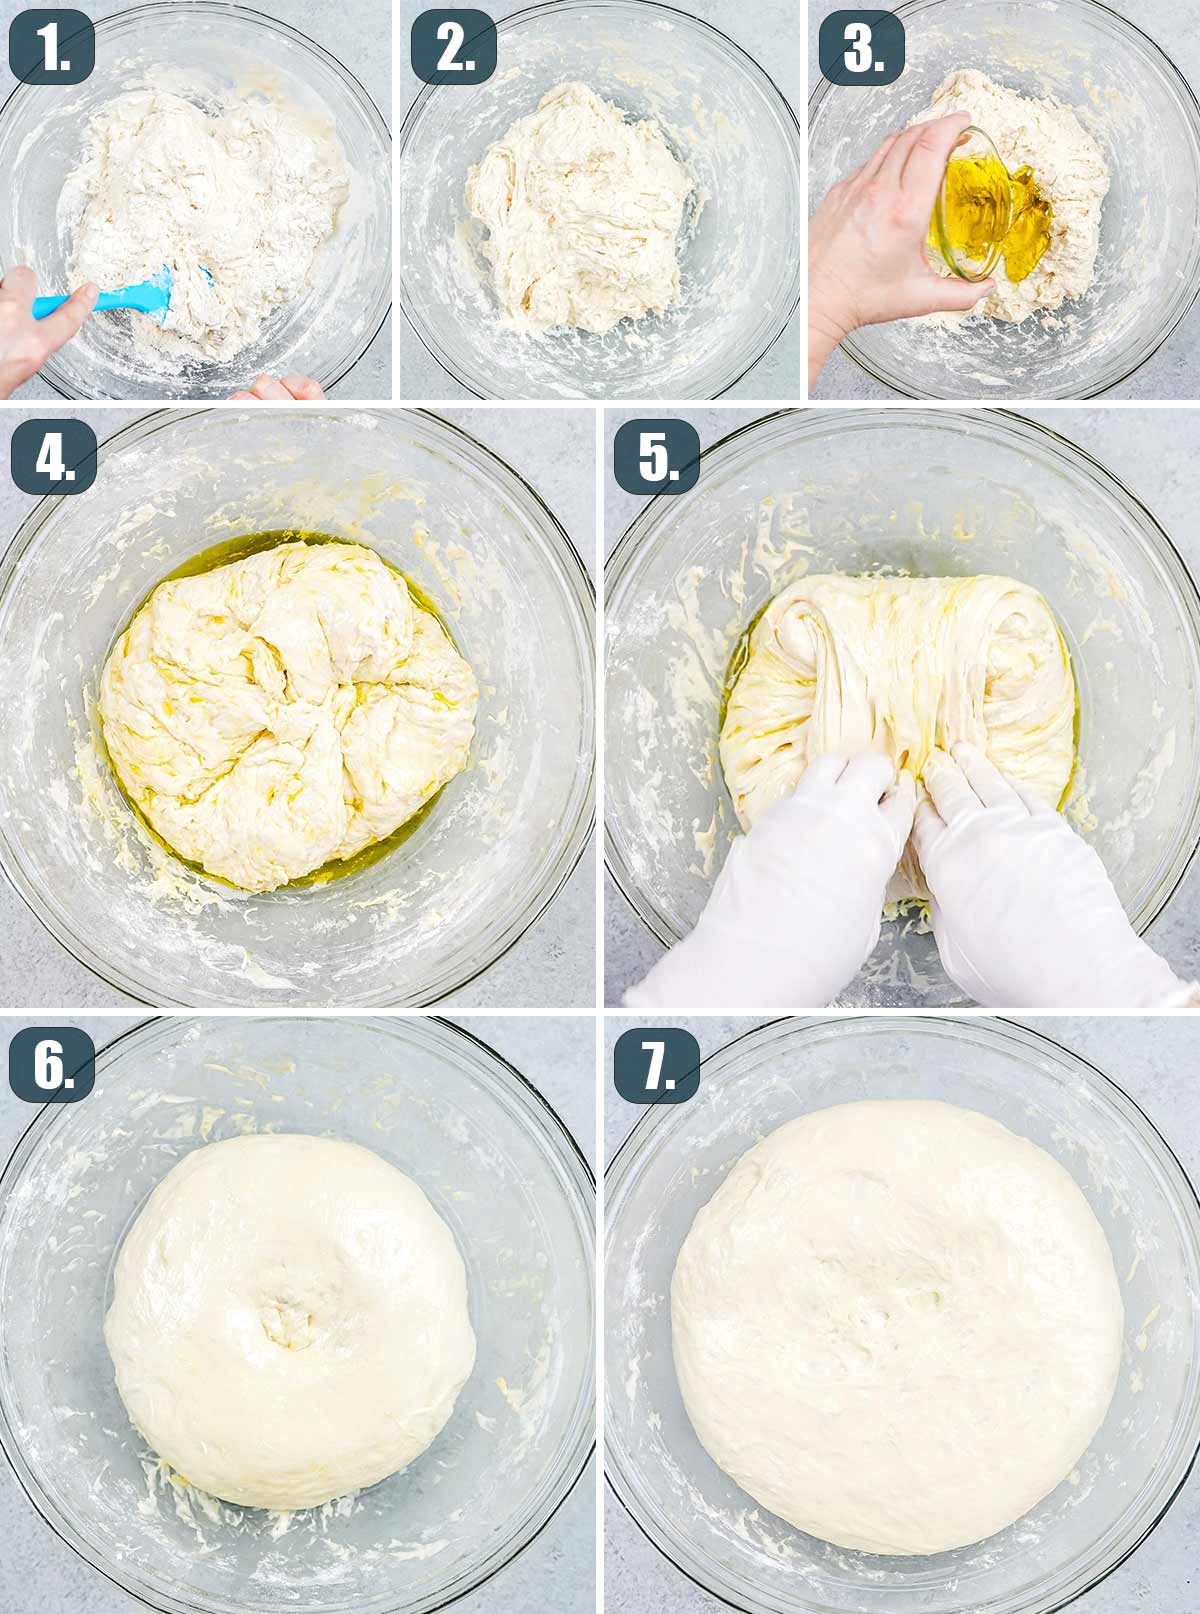 process shots showing how to make dough for focaccia.